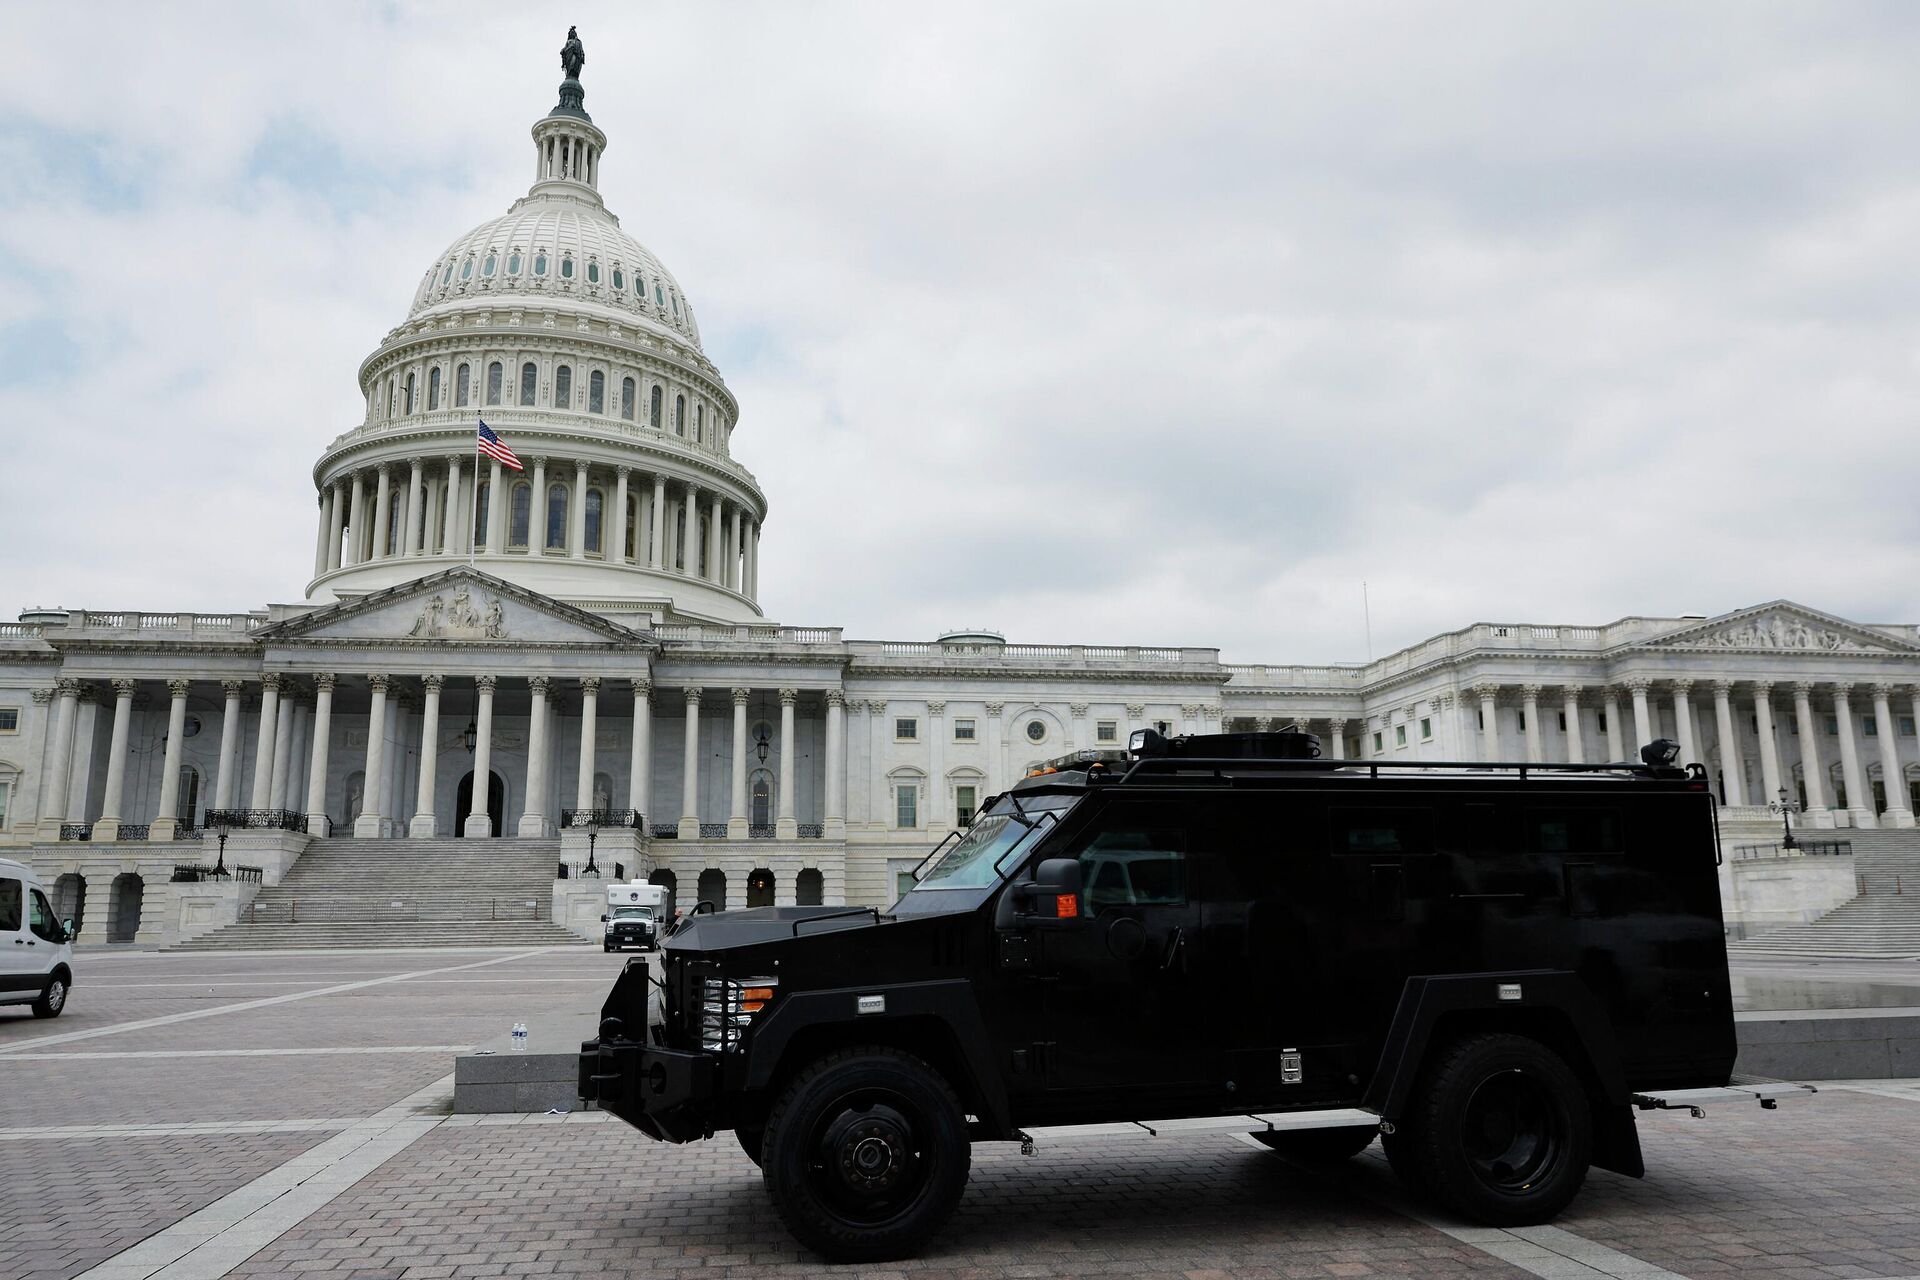 WASHINGTON, DC - JUNE 23: An armored police vehicle is positioned on the plaza between the U.S. Capitol and the Supreme Court after the court handed down its decision in Dobbs v Jackson Women's Health on June 24, 2022 in Washington, DC.  - Sputnik International, 1920, 25.06.2022